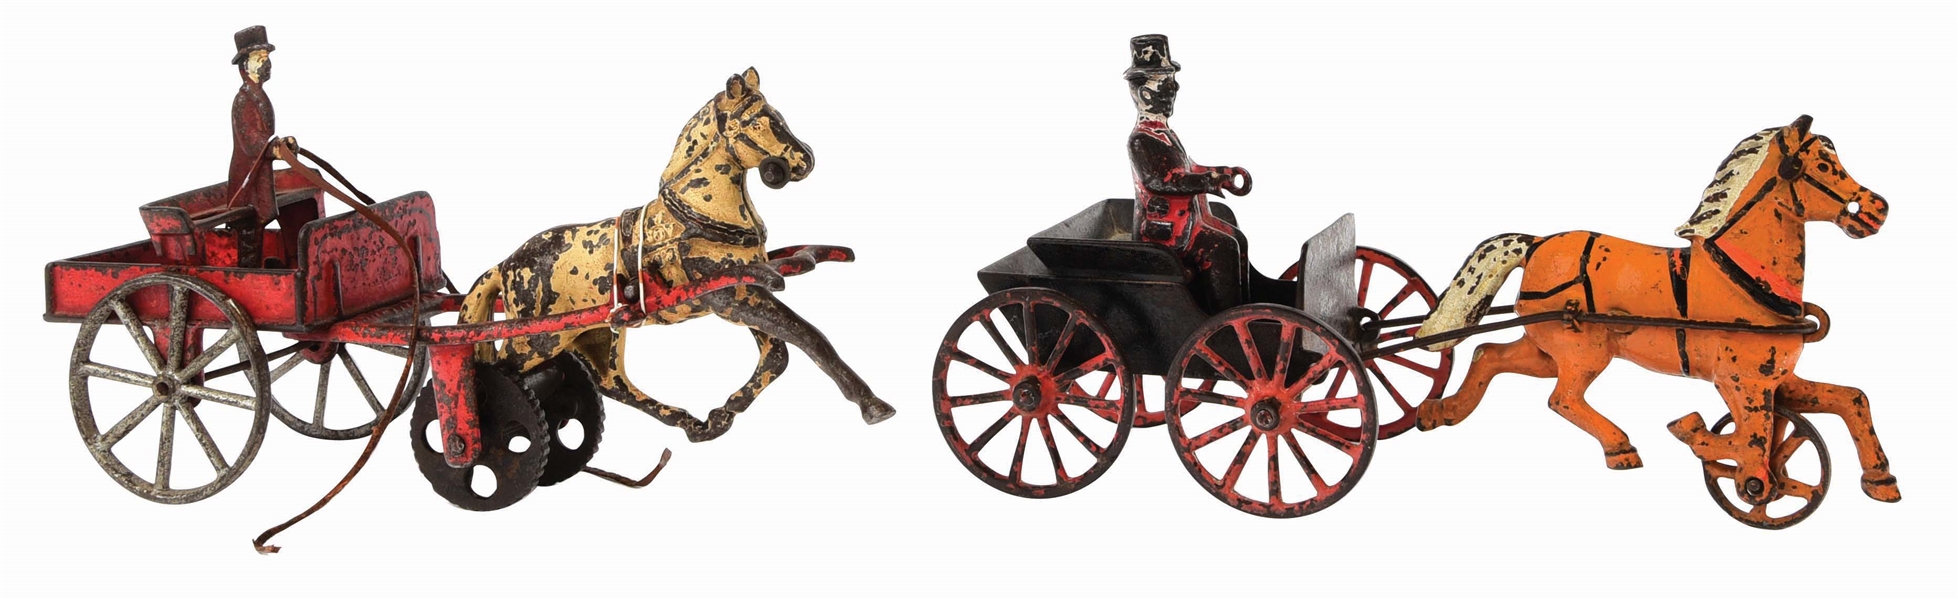 LOT OF 2: EARLY AMERICAN MADE CAST-IRON HORSE-DRAWN DOCTORS CARTS.